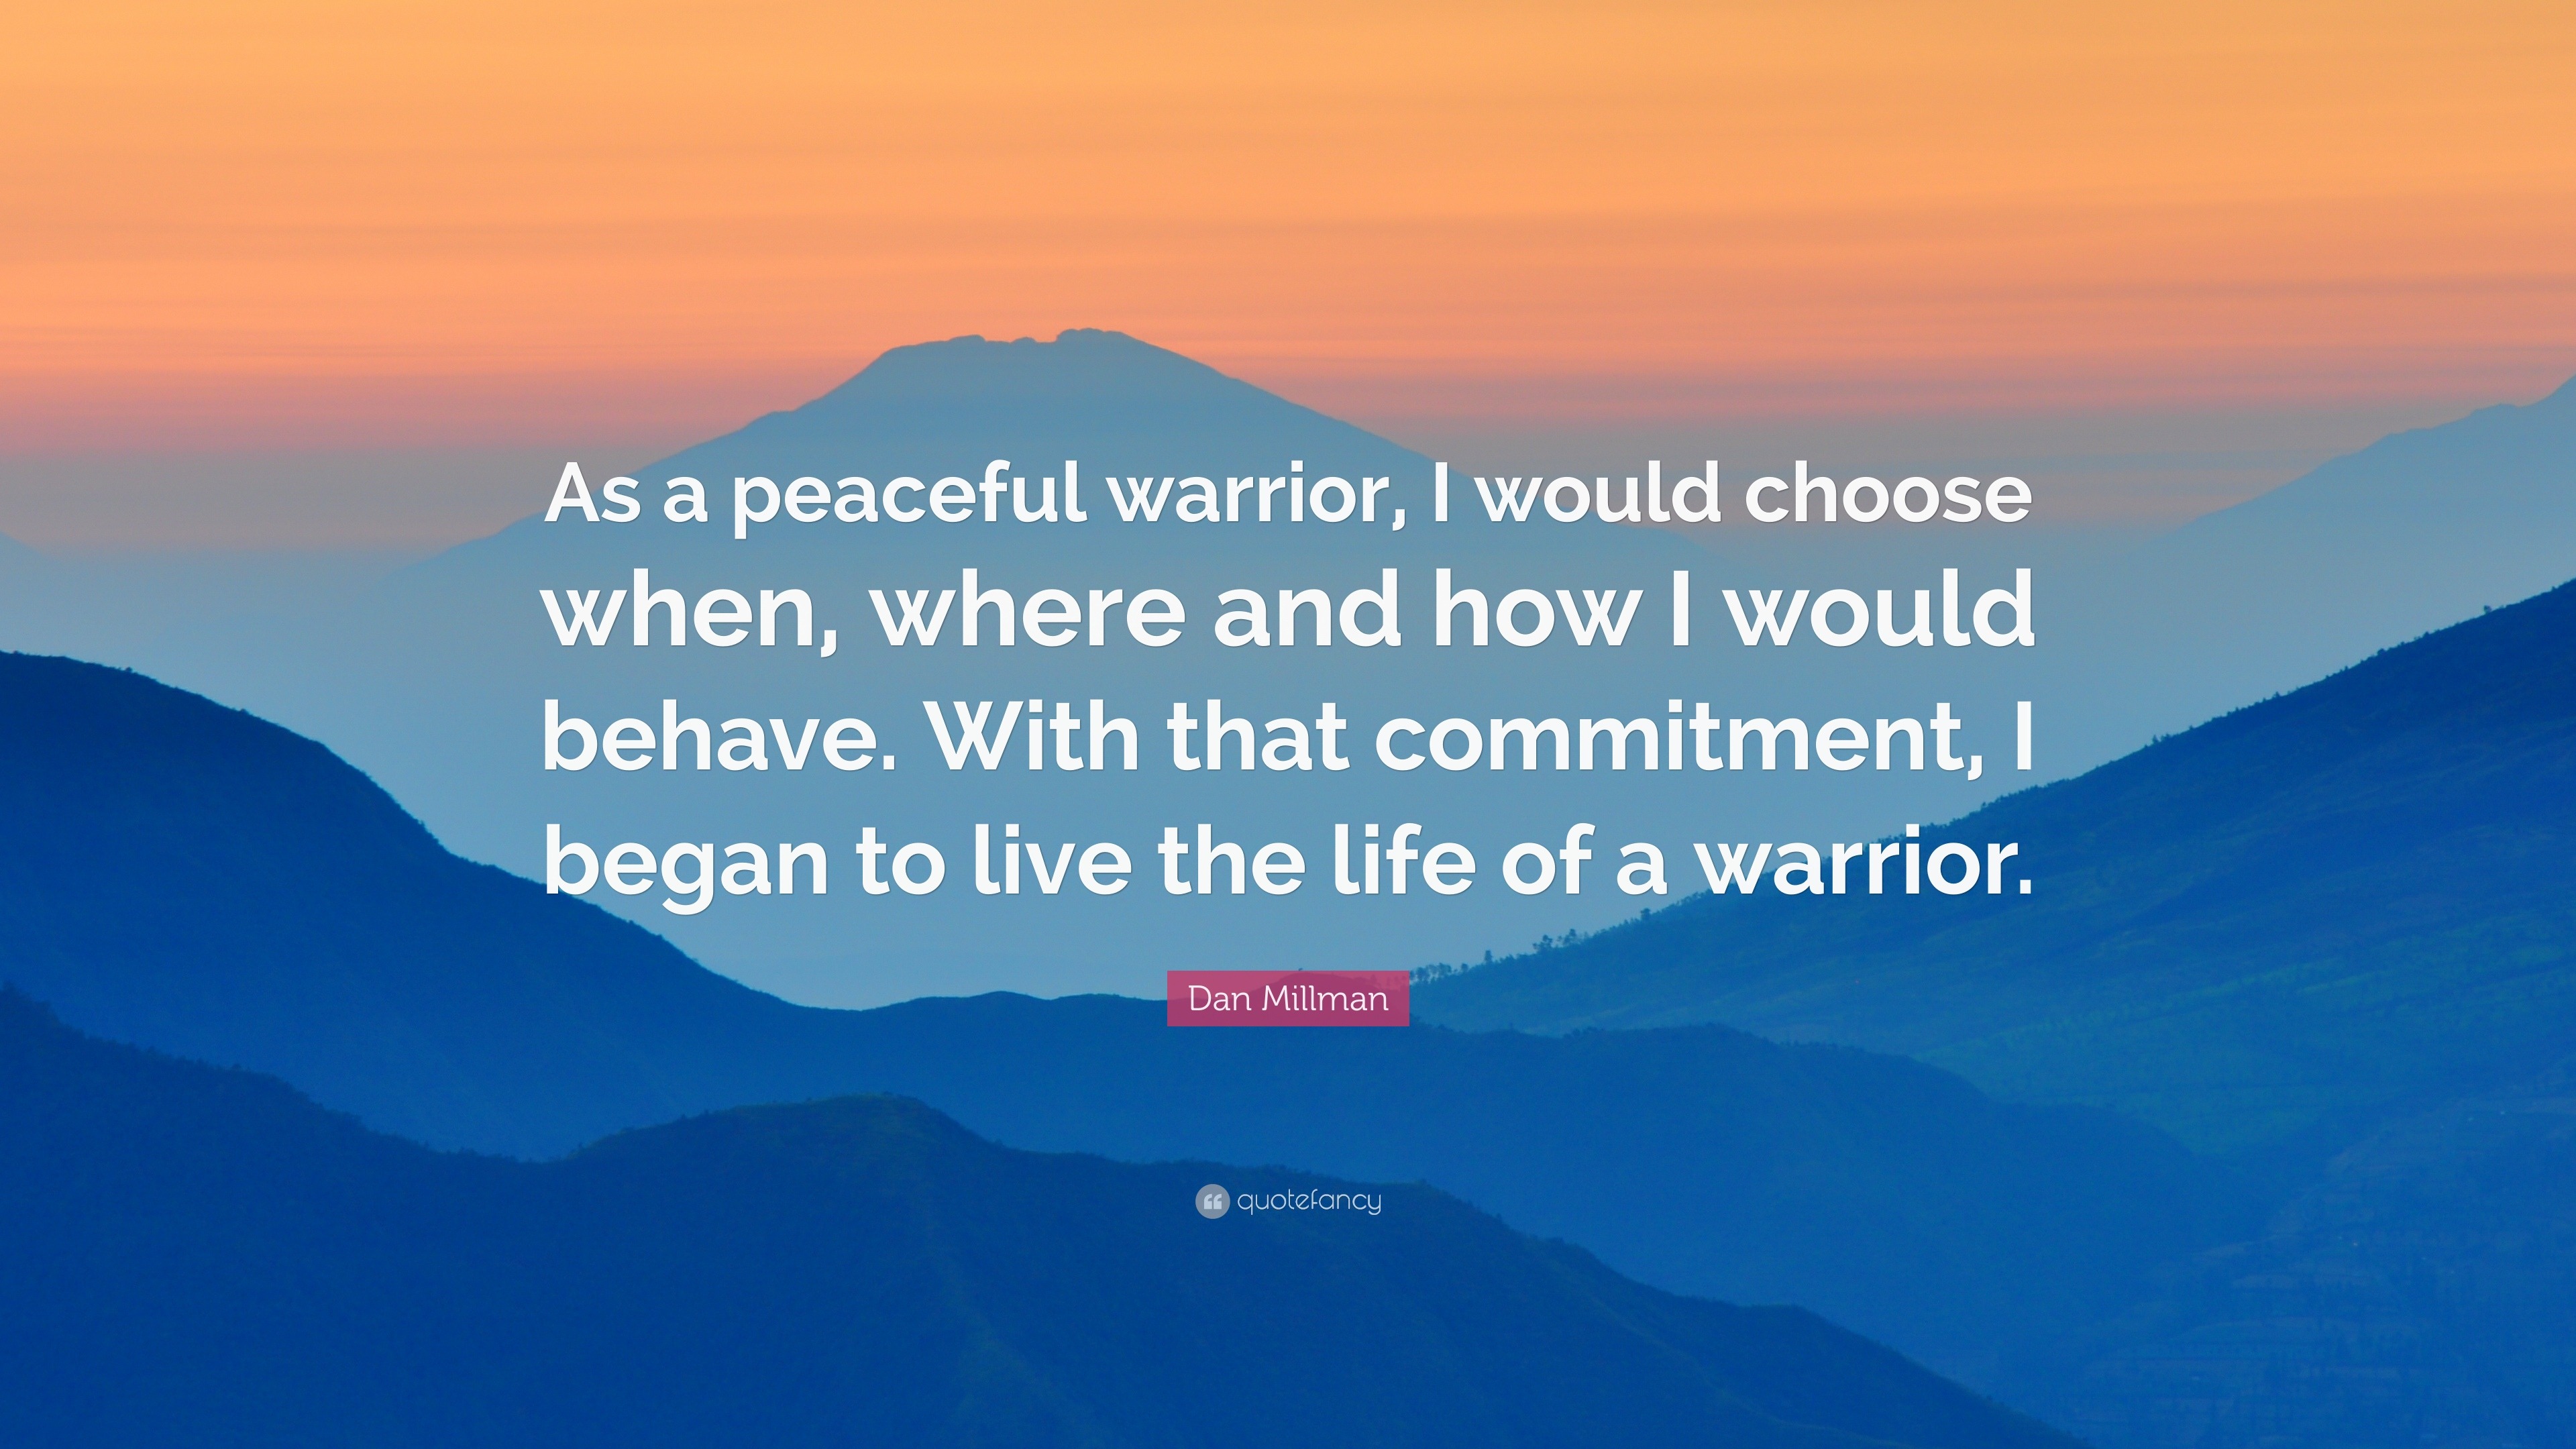 peaceful warrior meaning